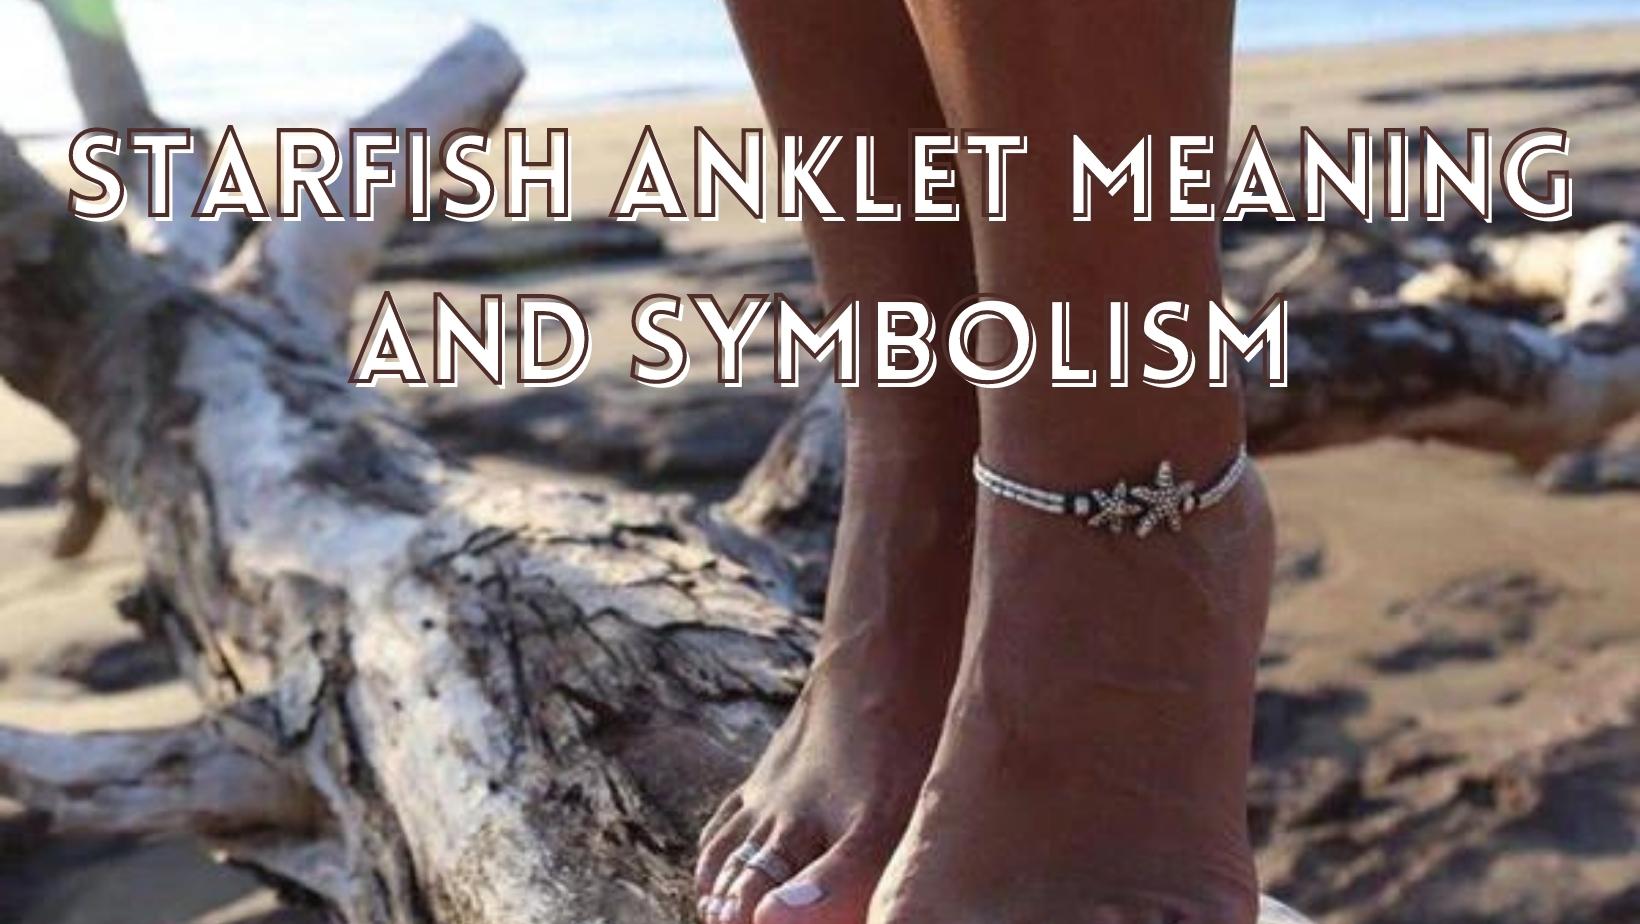 Meaning and symbolism of Starfish anklets